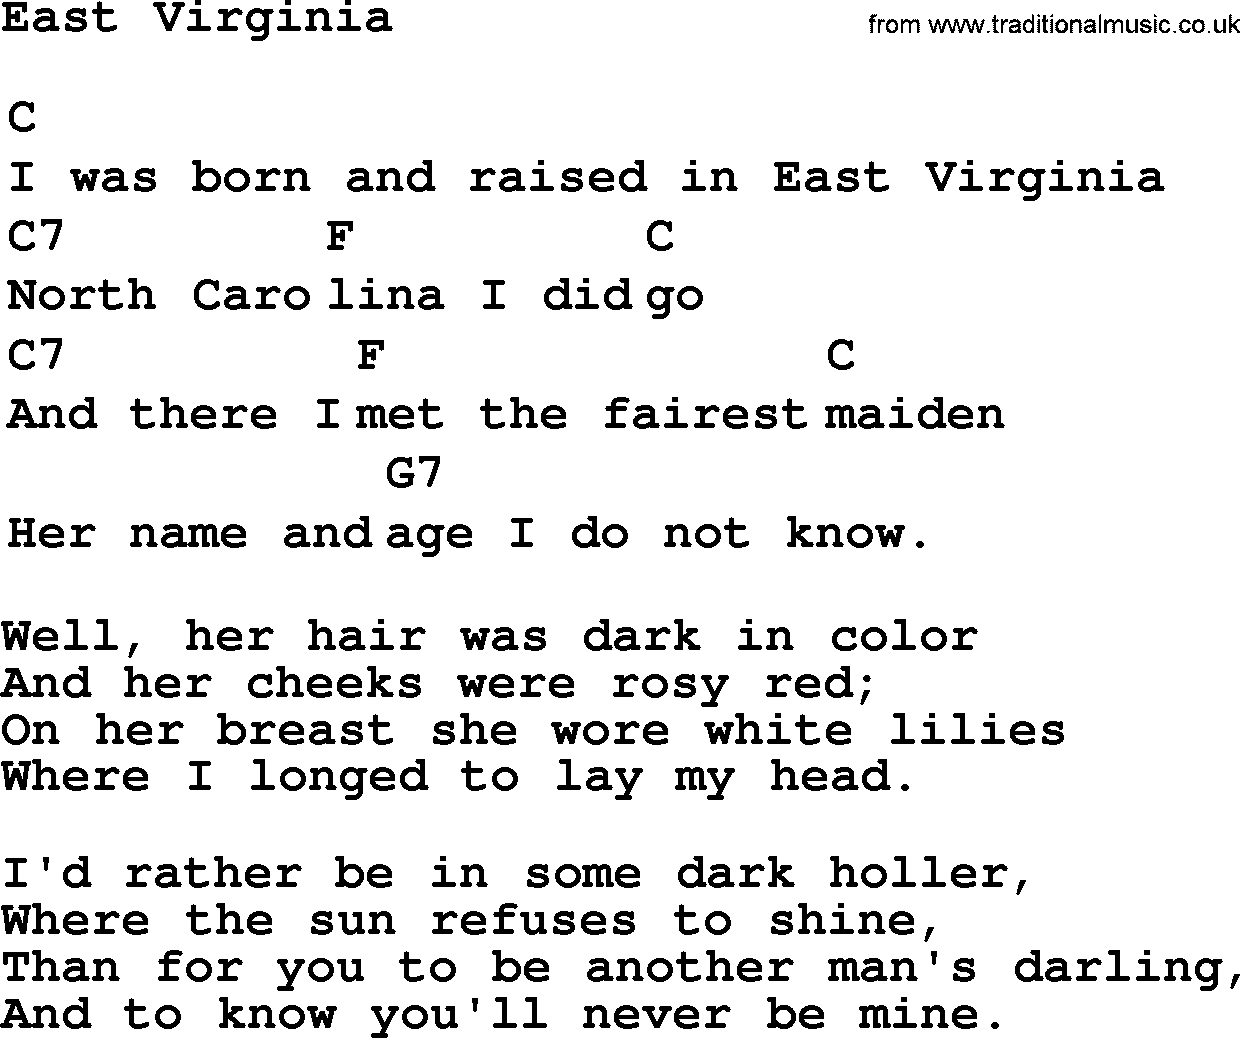 Top 1000 Most Popular Folk and Old-time Songs: East Virginia, lyrics and chords